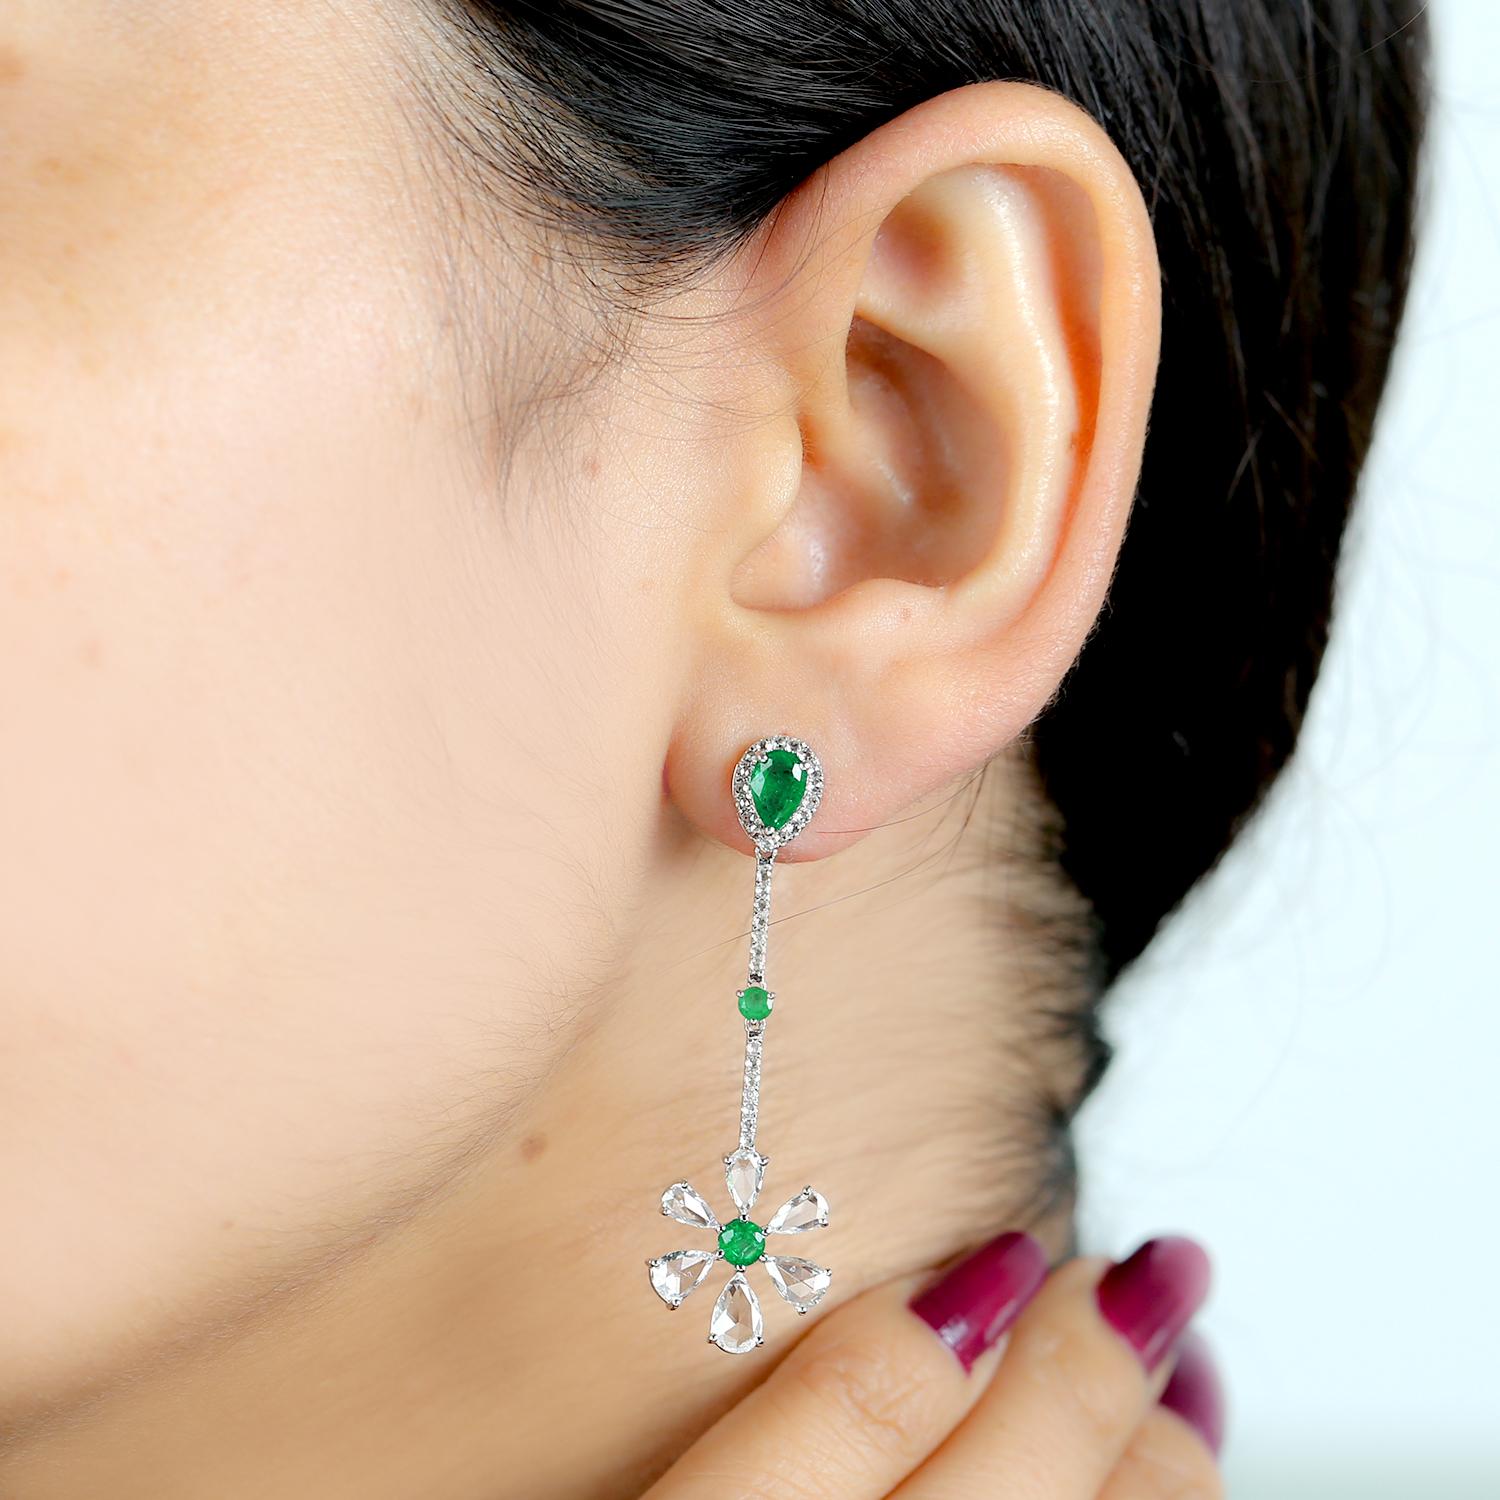 Cast in 14-karat gold, these beautiful earrings are hand set with 1.28 carats of emerald and 2.06 carats of sparkling diamonds. 

FOLLOW  MEGHNA JEWELS storefront to view the latest collection & exclusive pieces.  Meghna Jewels is proudly rated as a